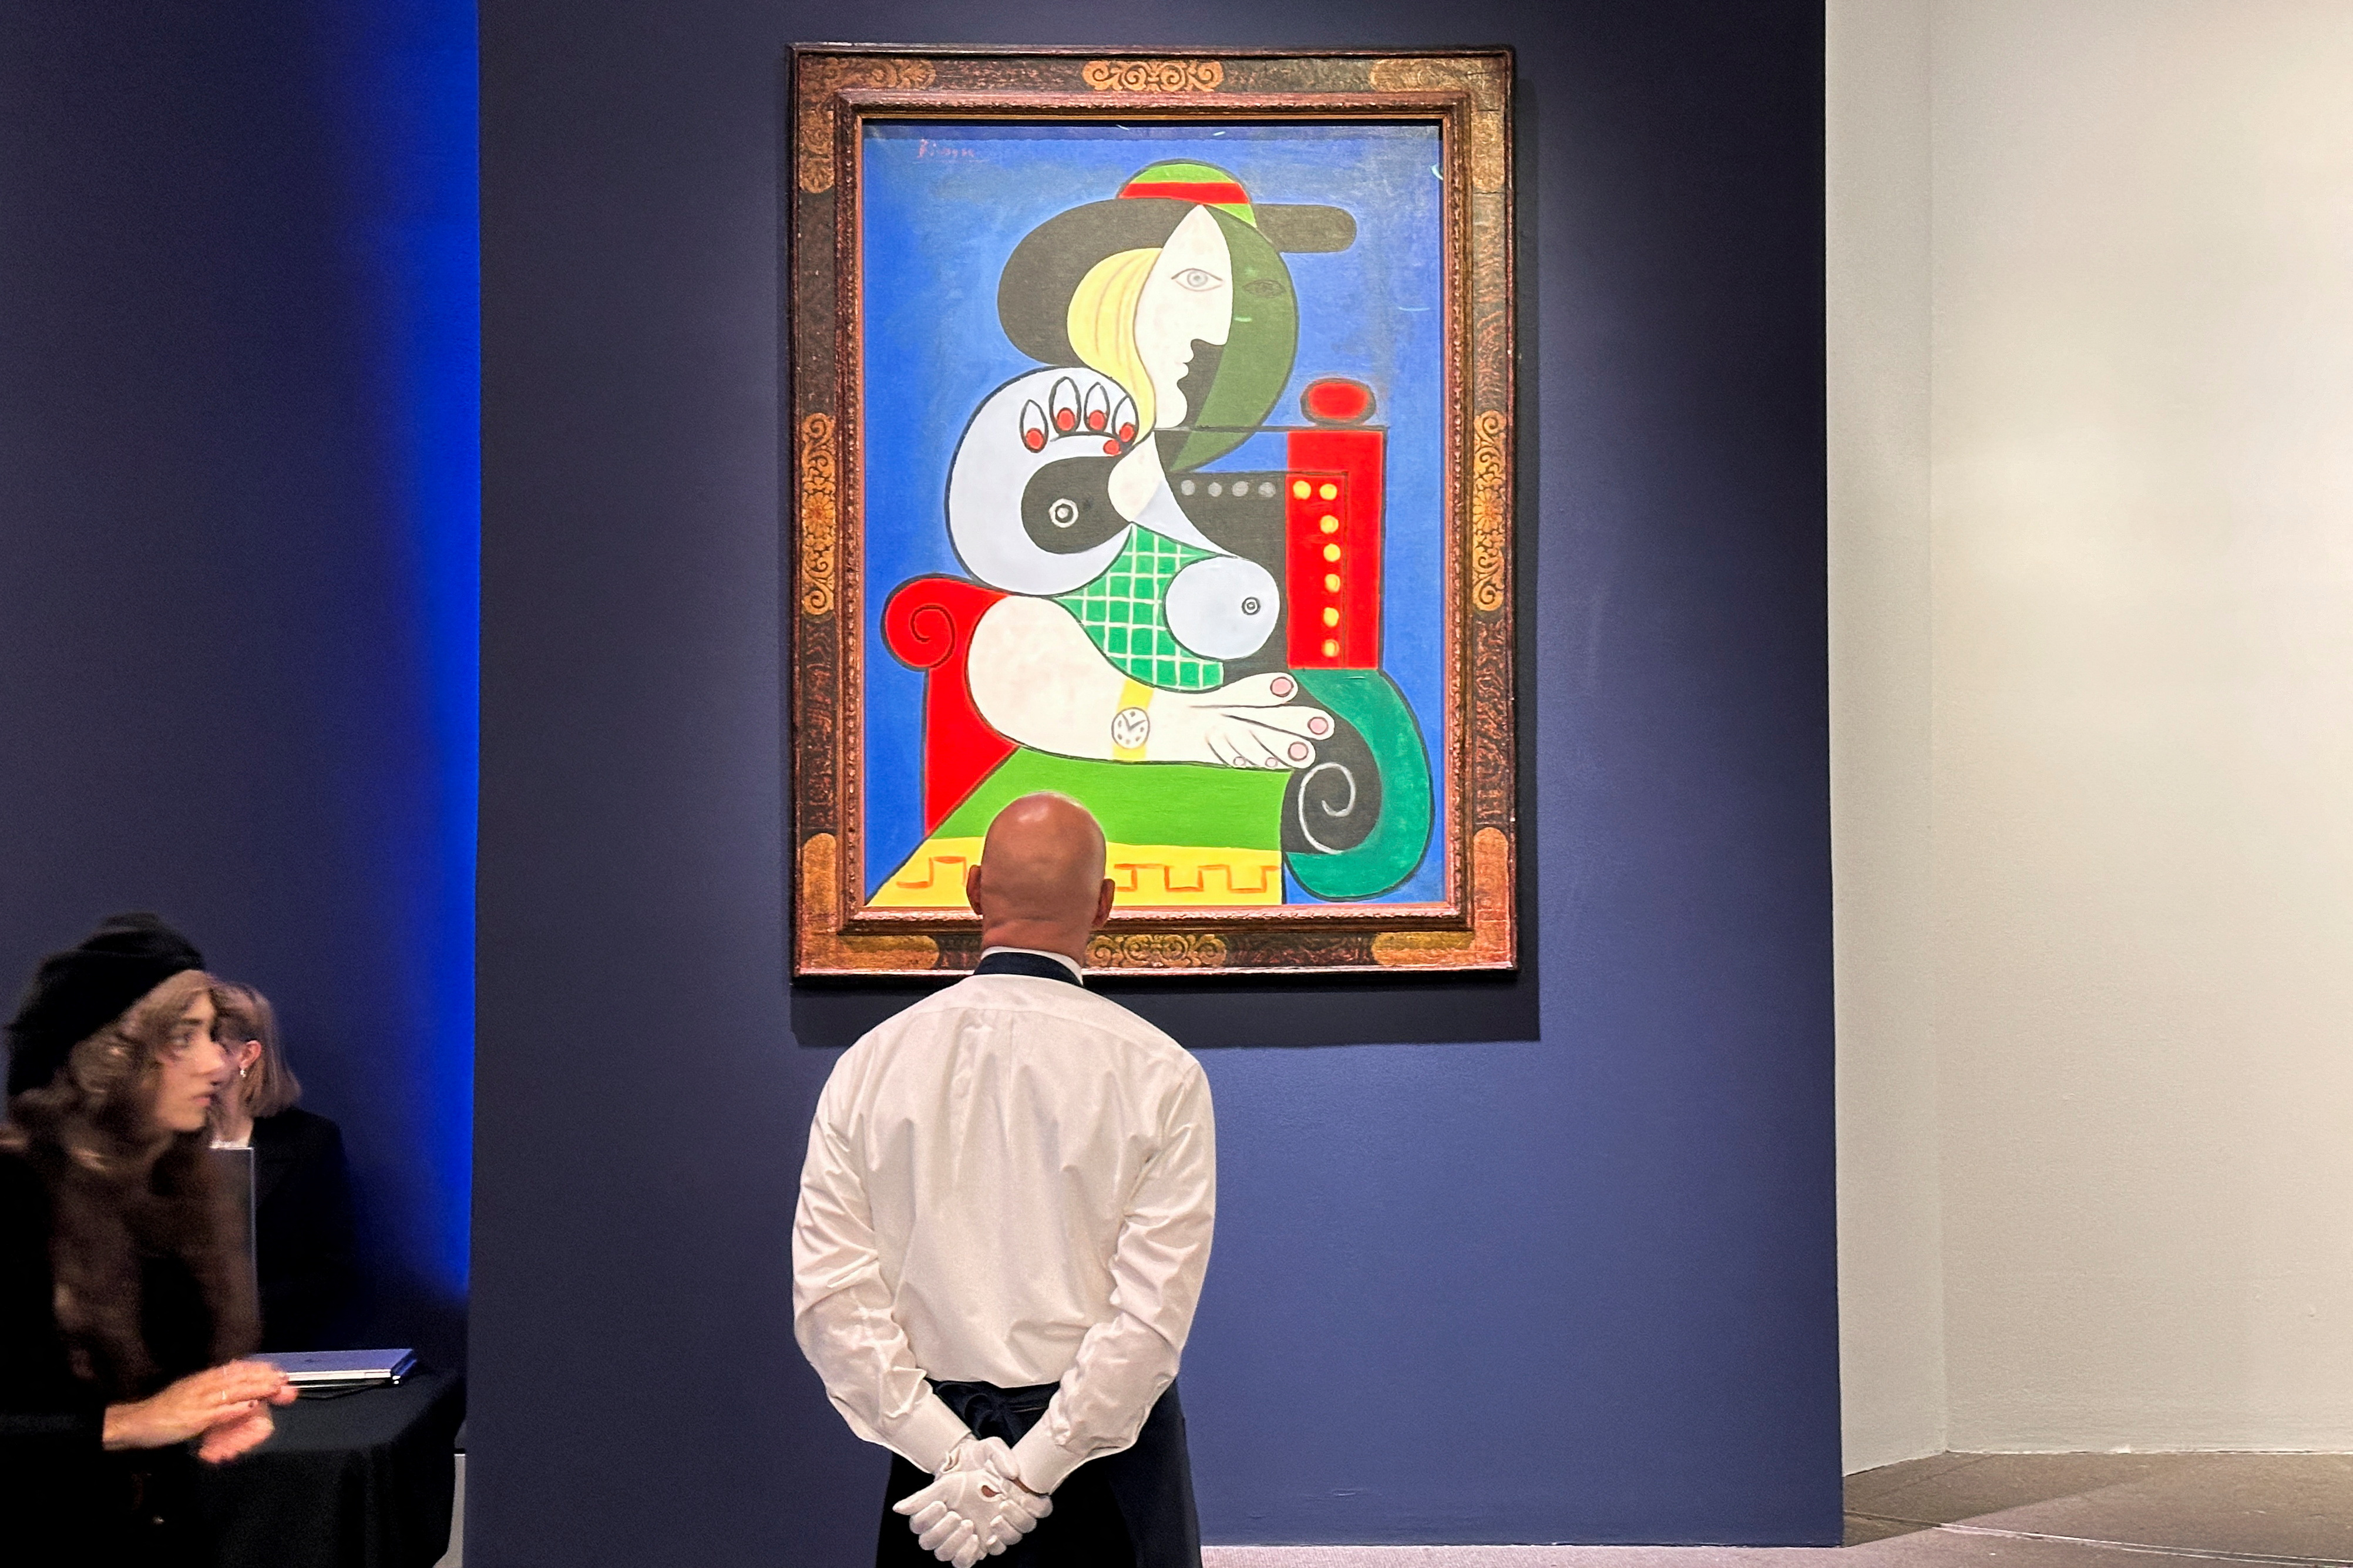 Picasso painting sells for $139 million, most valuable art